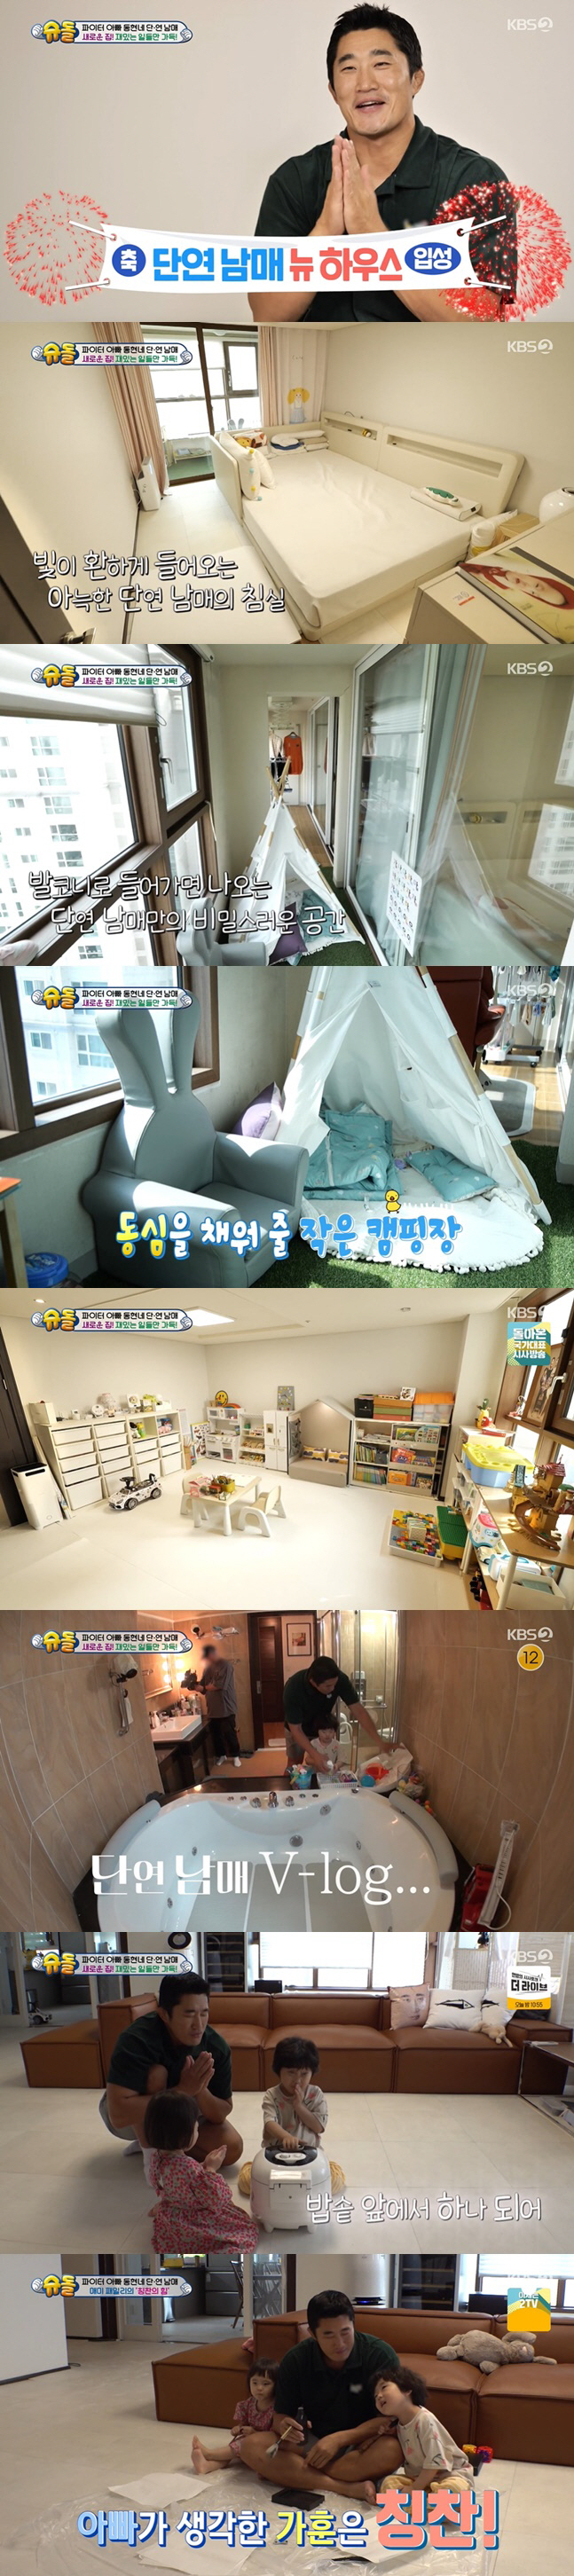 The Return of Superman Kim Dong-hyun introduced his new home.KBS2 The Return of Superman broadcast on the 13th was decorated with Love is full, I will give it to you.Kim Dong-Hyun and farBrother and Sister have unveiled a new spacious nest with a third tobongi scheduled for delivery in June.The new house is full of cozy by far Brother and Sister bedrooms that light up in a spacious living room where by far Brother and Sister can play freely, a small camping ground secretly arranged on the balcony, a playroom that does not envy the Kids Cafe, and a spacious bathroom.On this day, Kim Dong-Hyun and farBrother and Sister decided to set up a family motto for the next five families to commemorate the new house move.When father Kim Dong-Hyun declared, The family motto of the cicada family is the power of praise, by farBrother and Sister showed the ability to practice the family motto with a thumb.